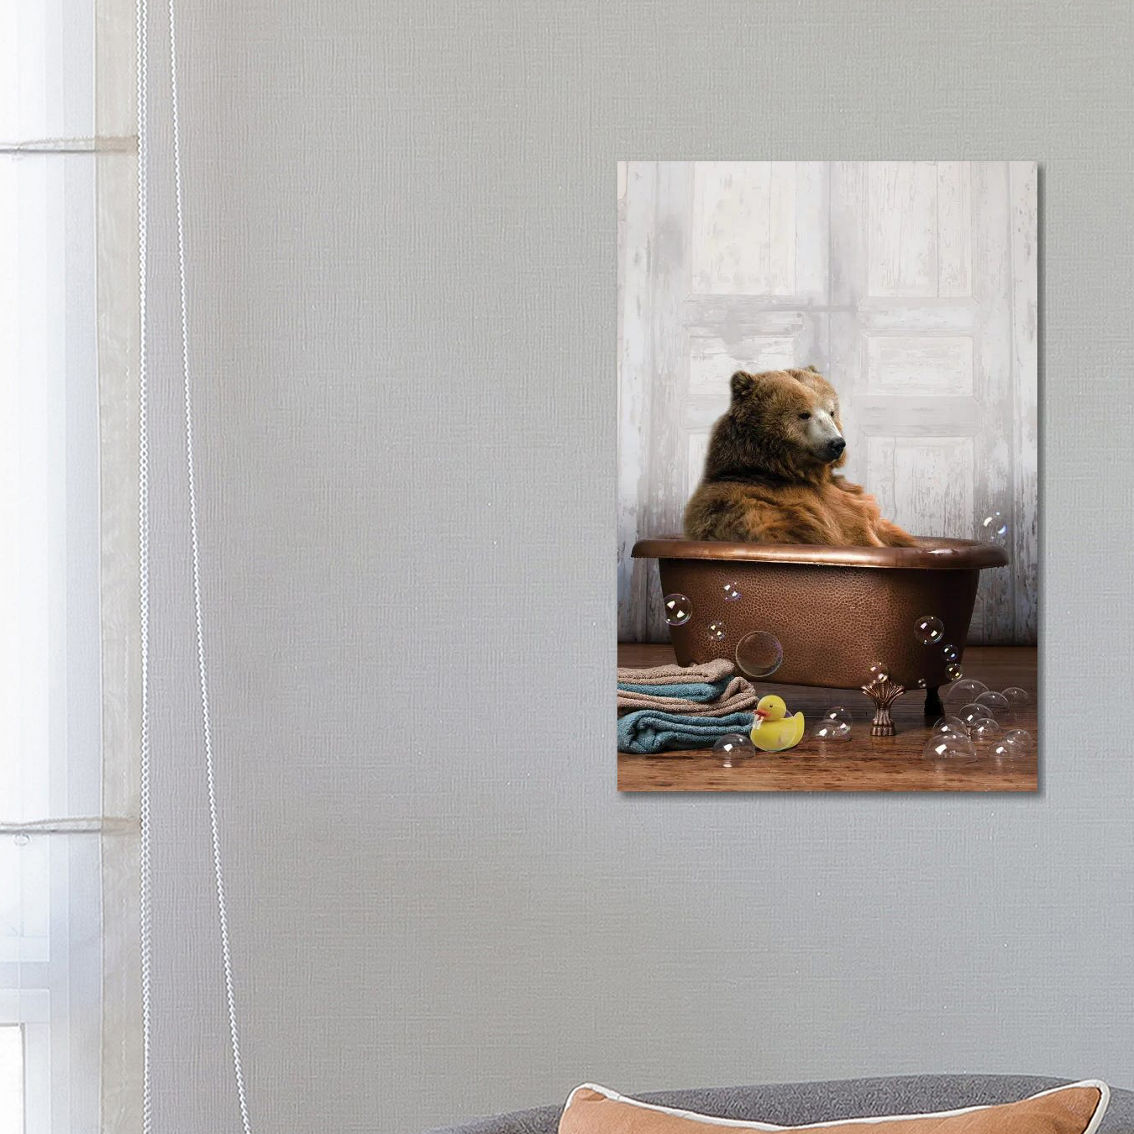 Bear In The Tub Black Artist Stylish Canvas Art Print by Domonique Brown - Image 2 of 2